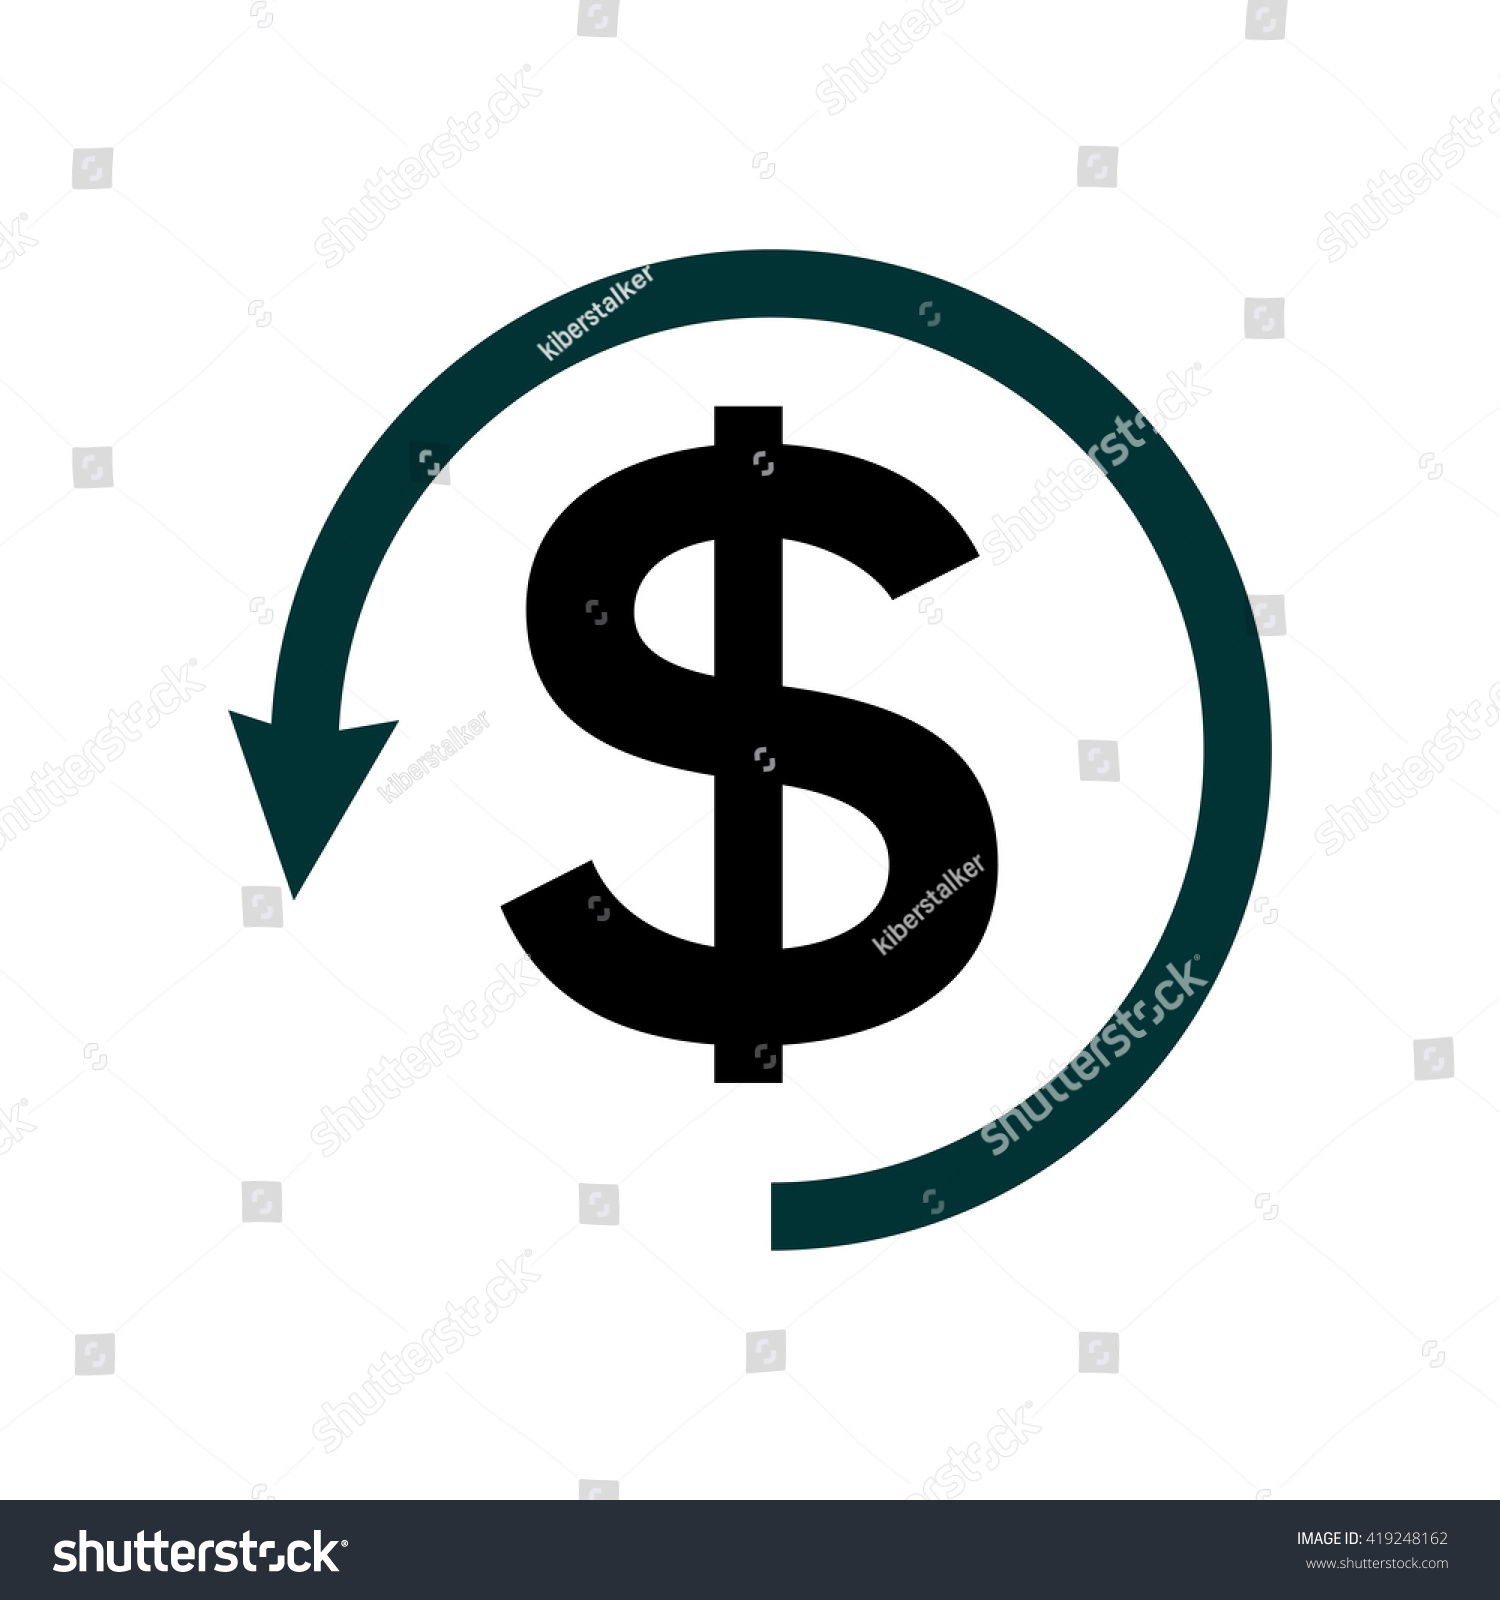 Refund icon from Business Bicolor Set Royalty Free Vector